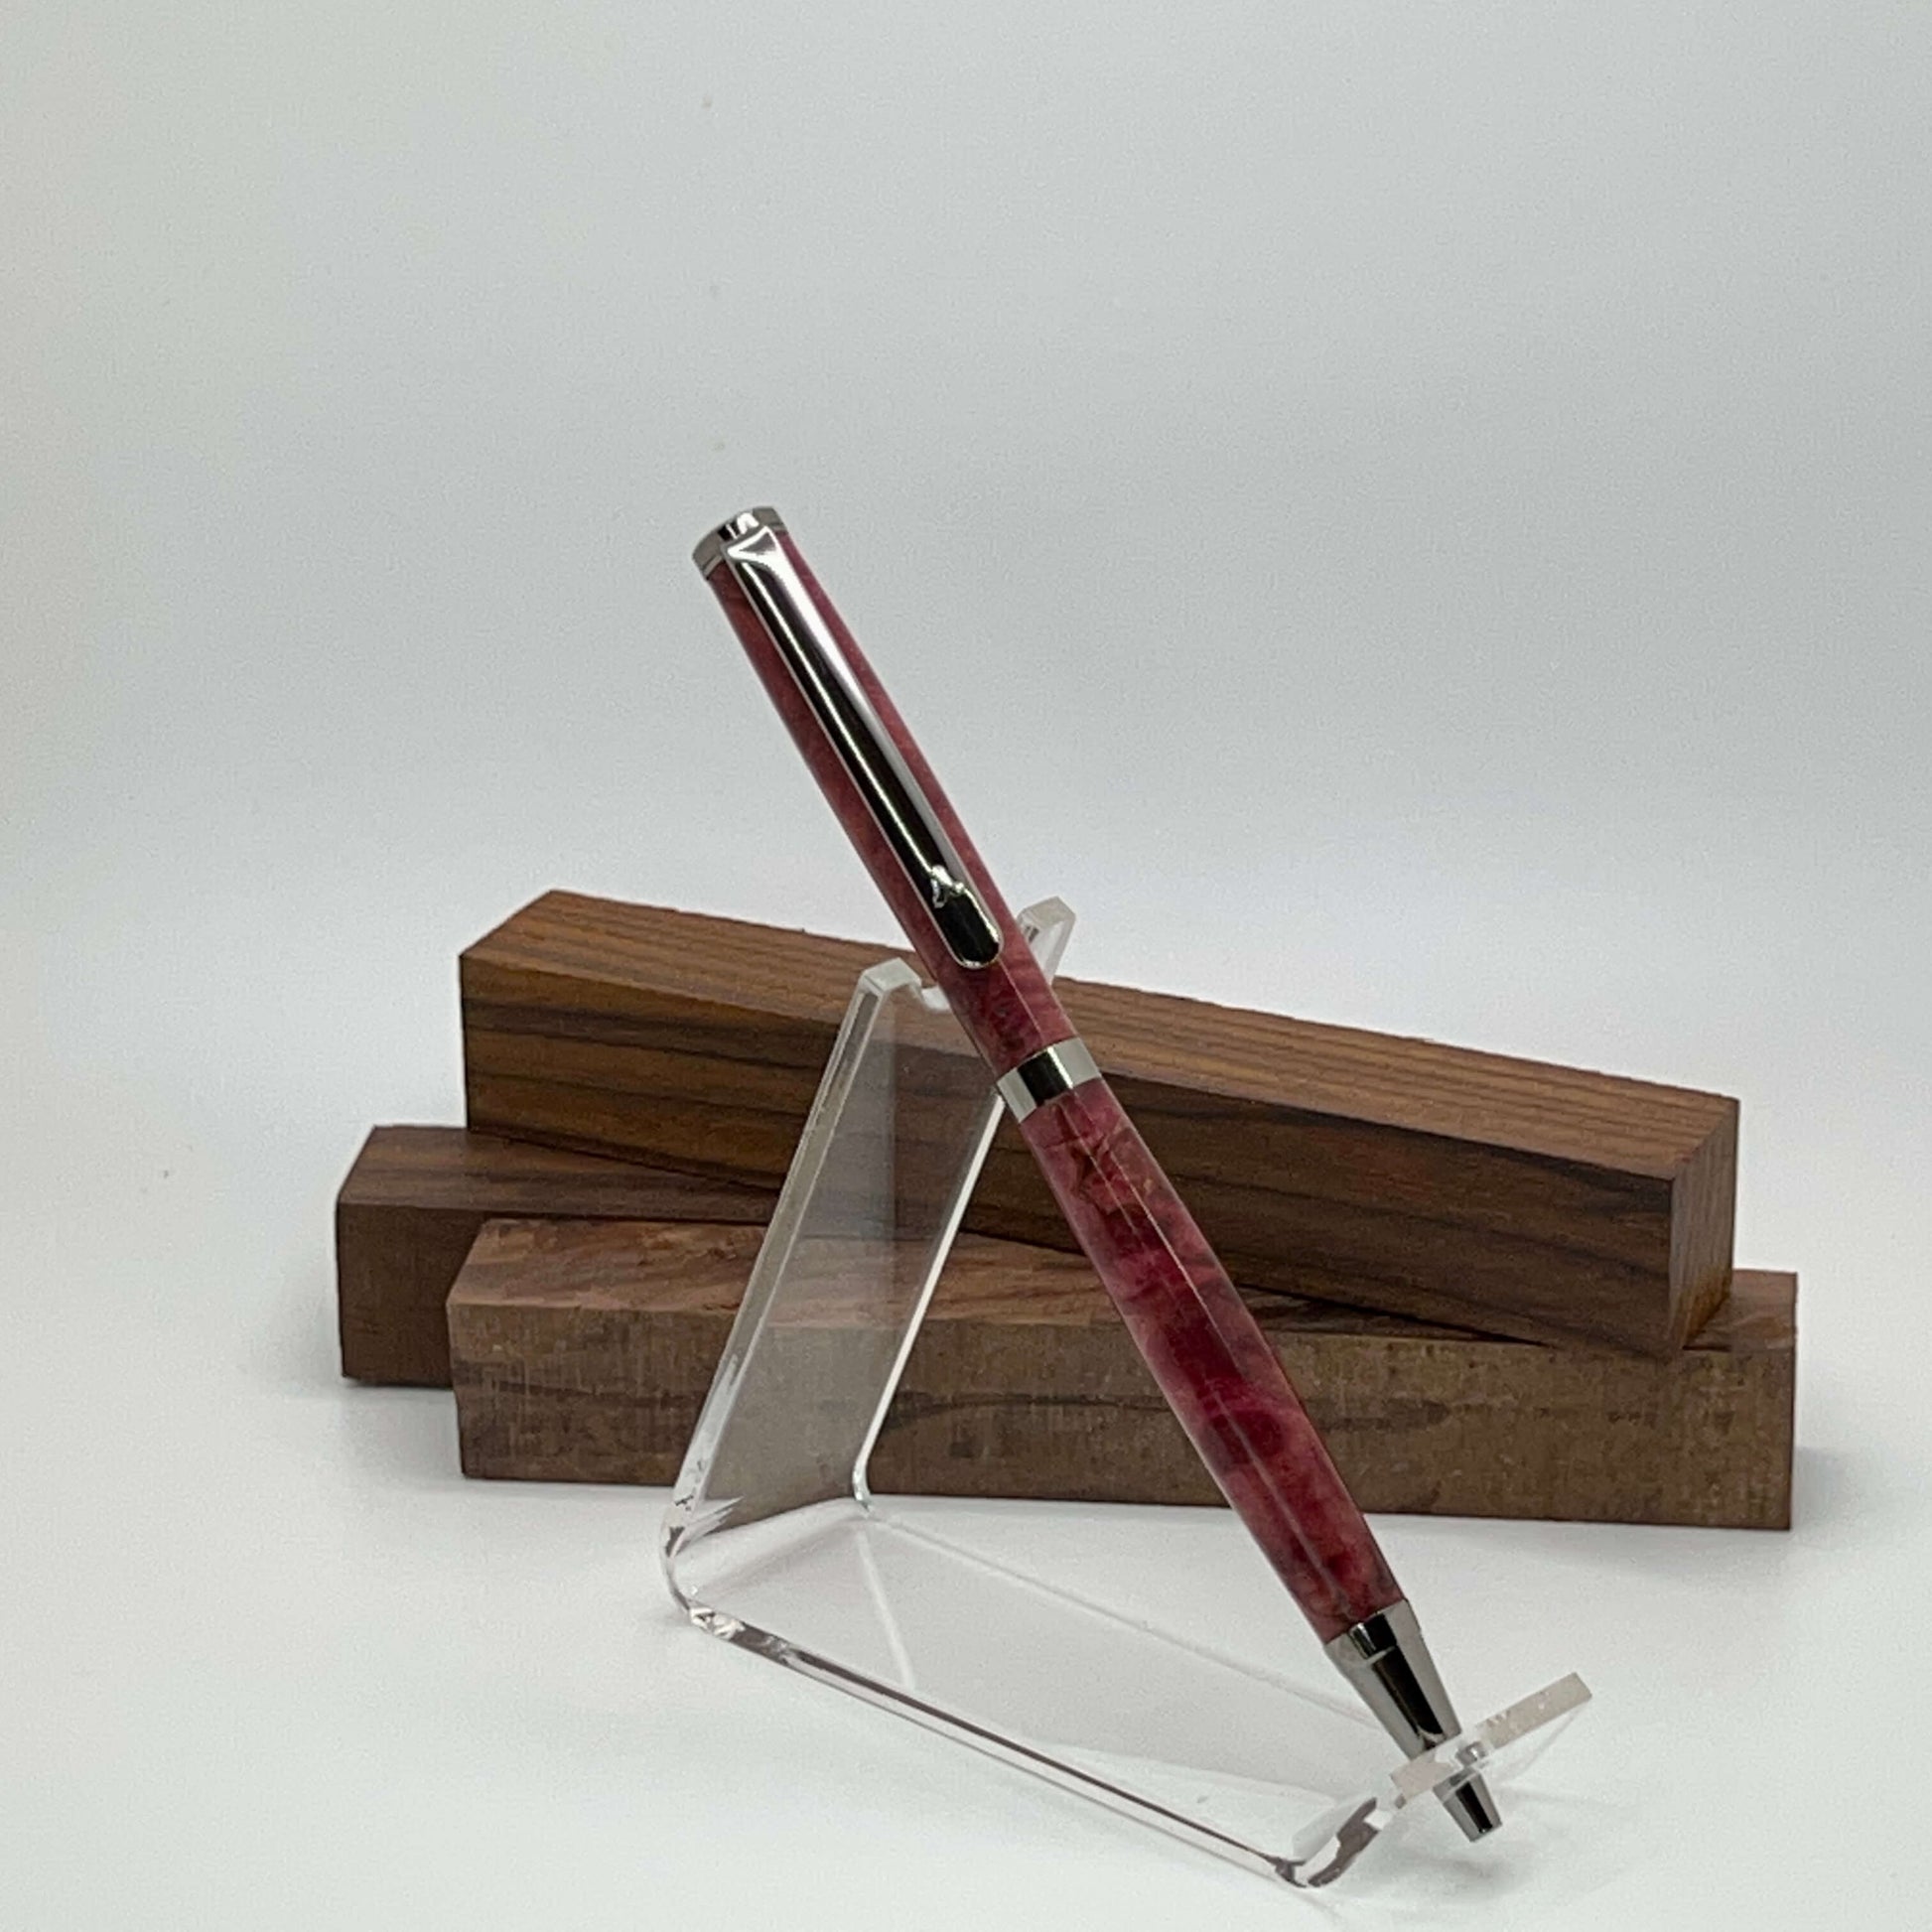 Handcrafted pen with Box Elder Burl wood dyed magenta and black titanium hardware